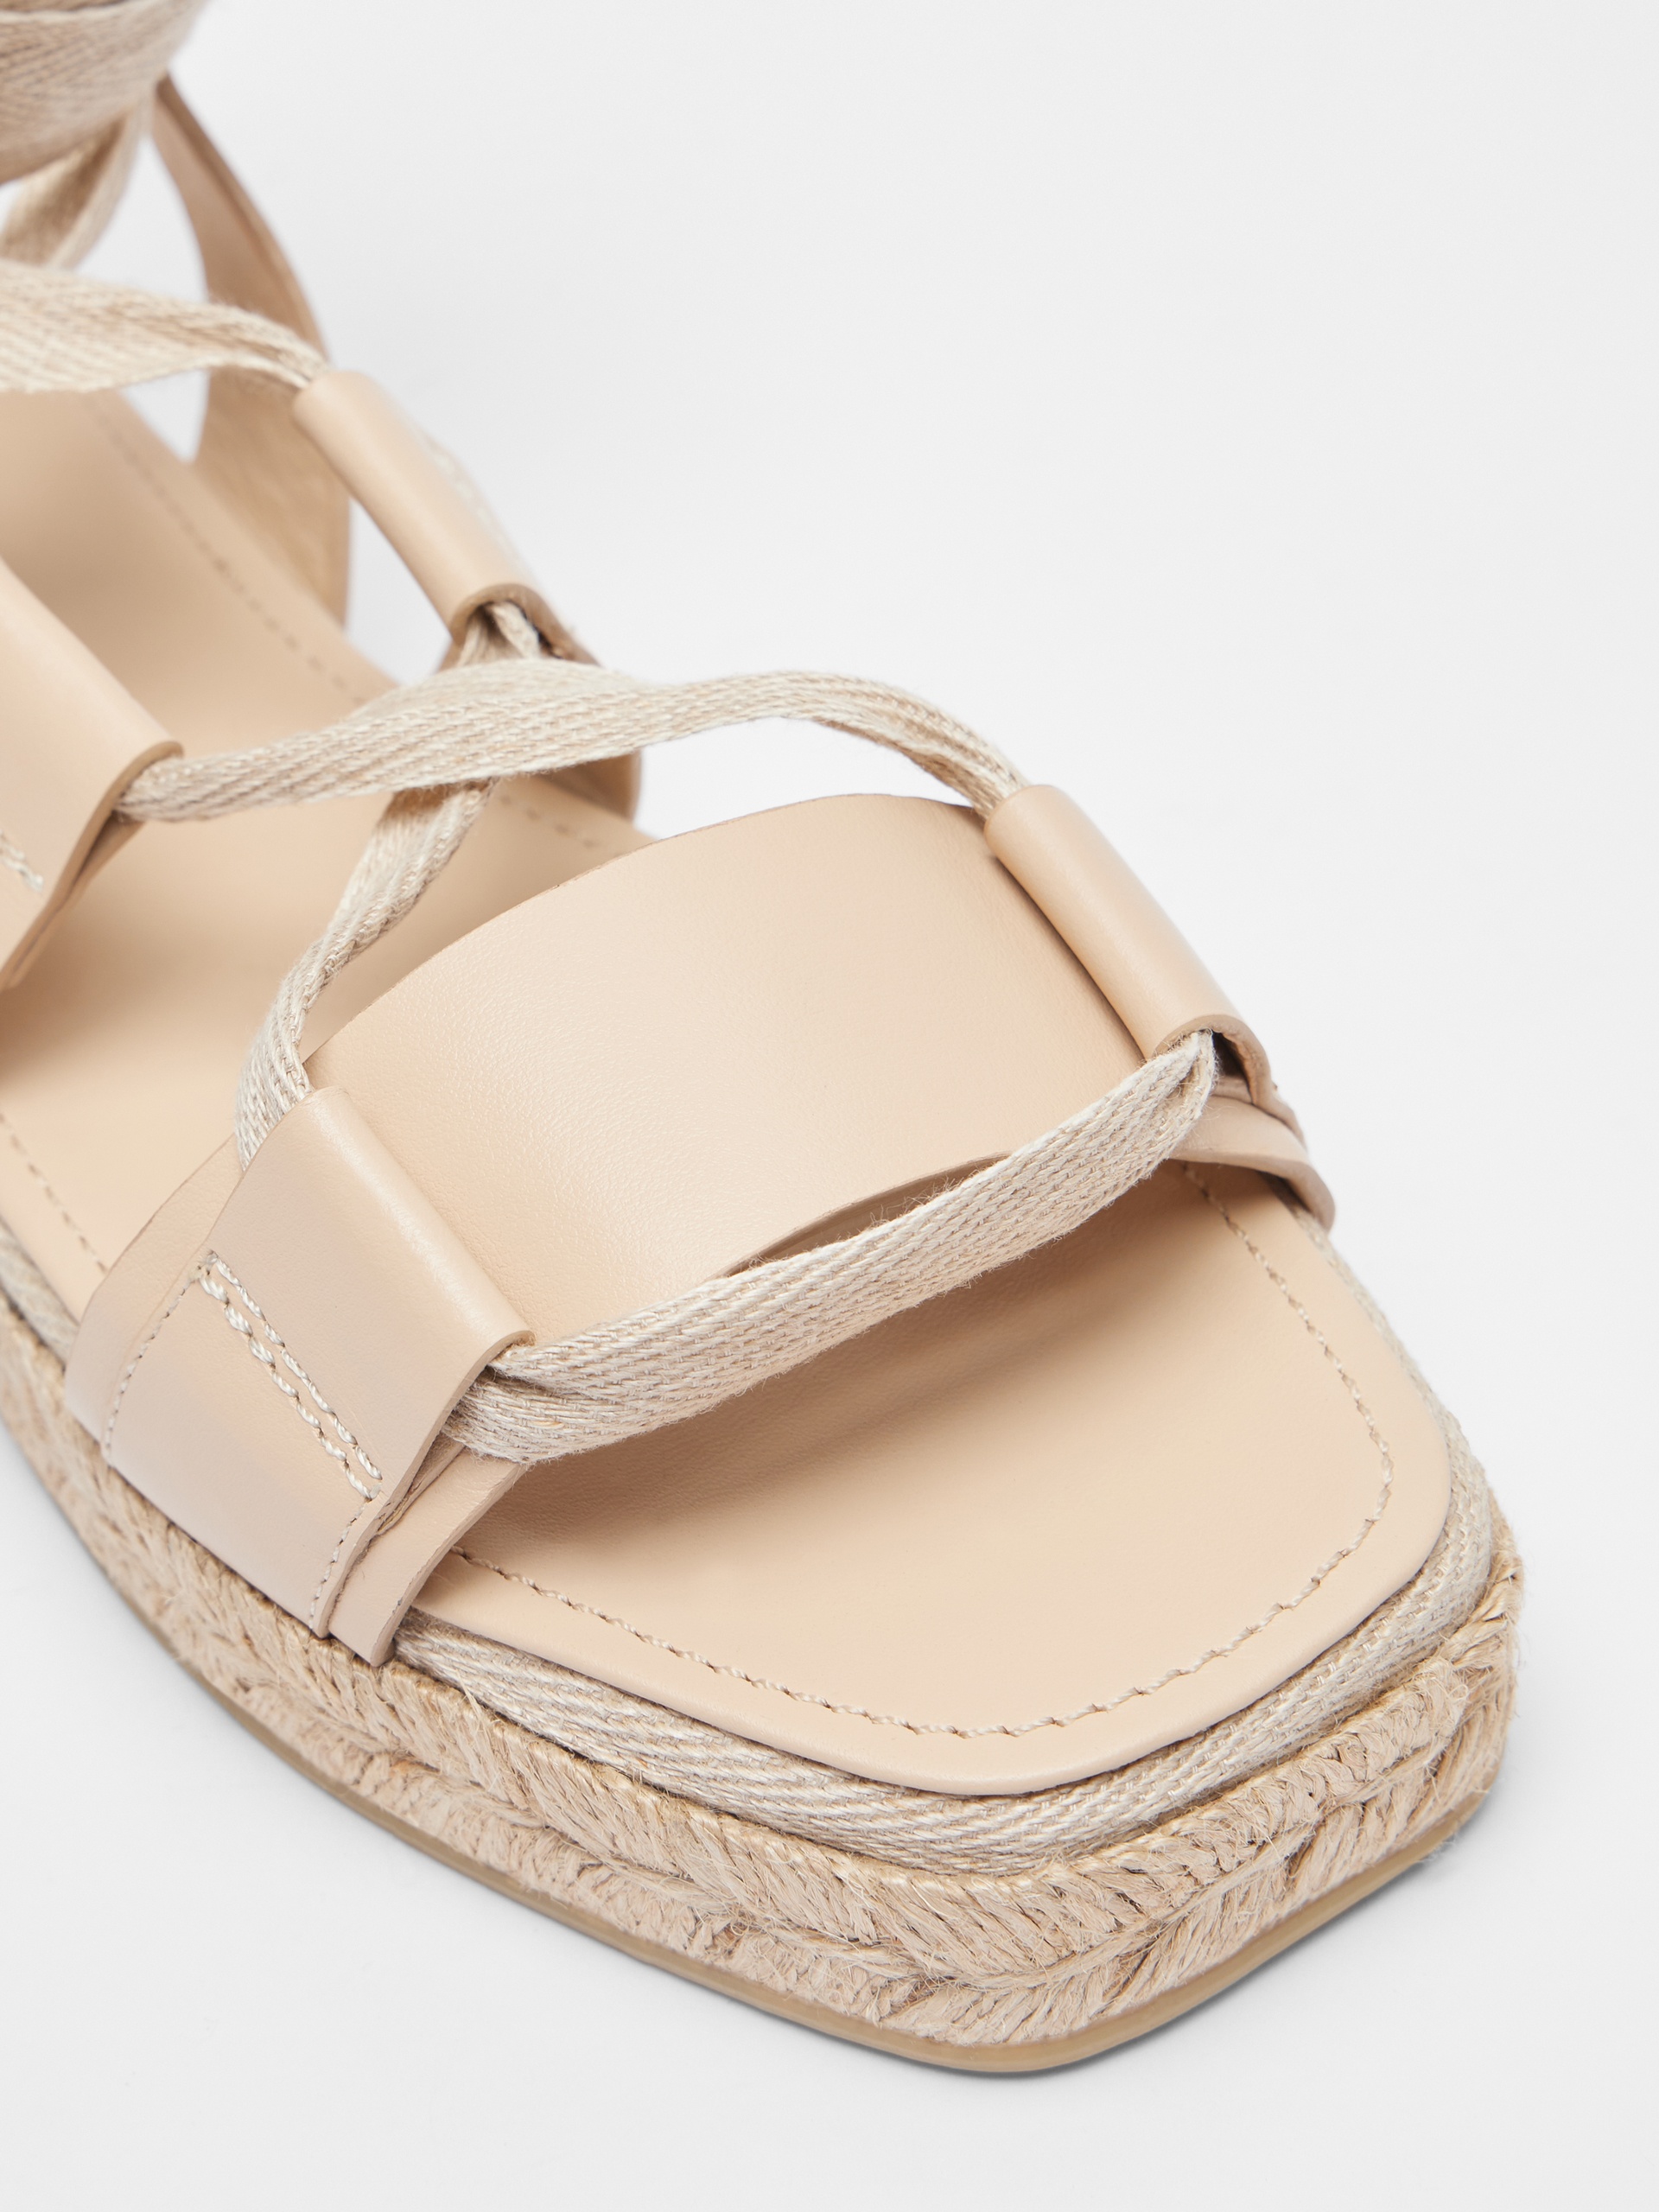 Nappa leather sandals - 4